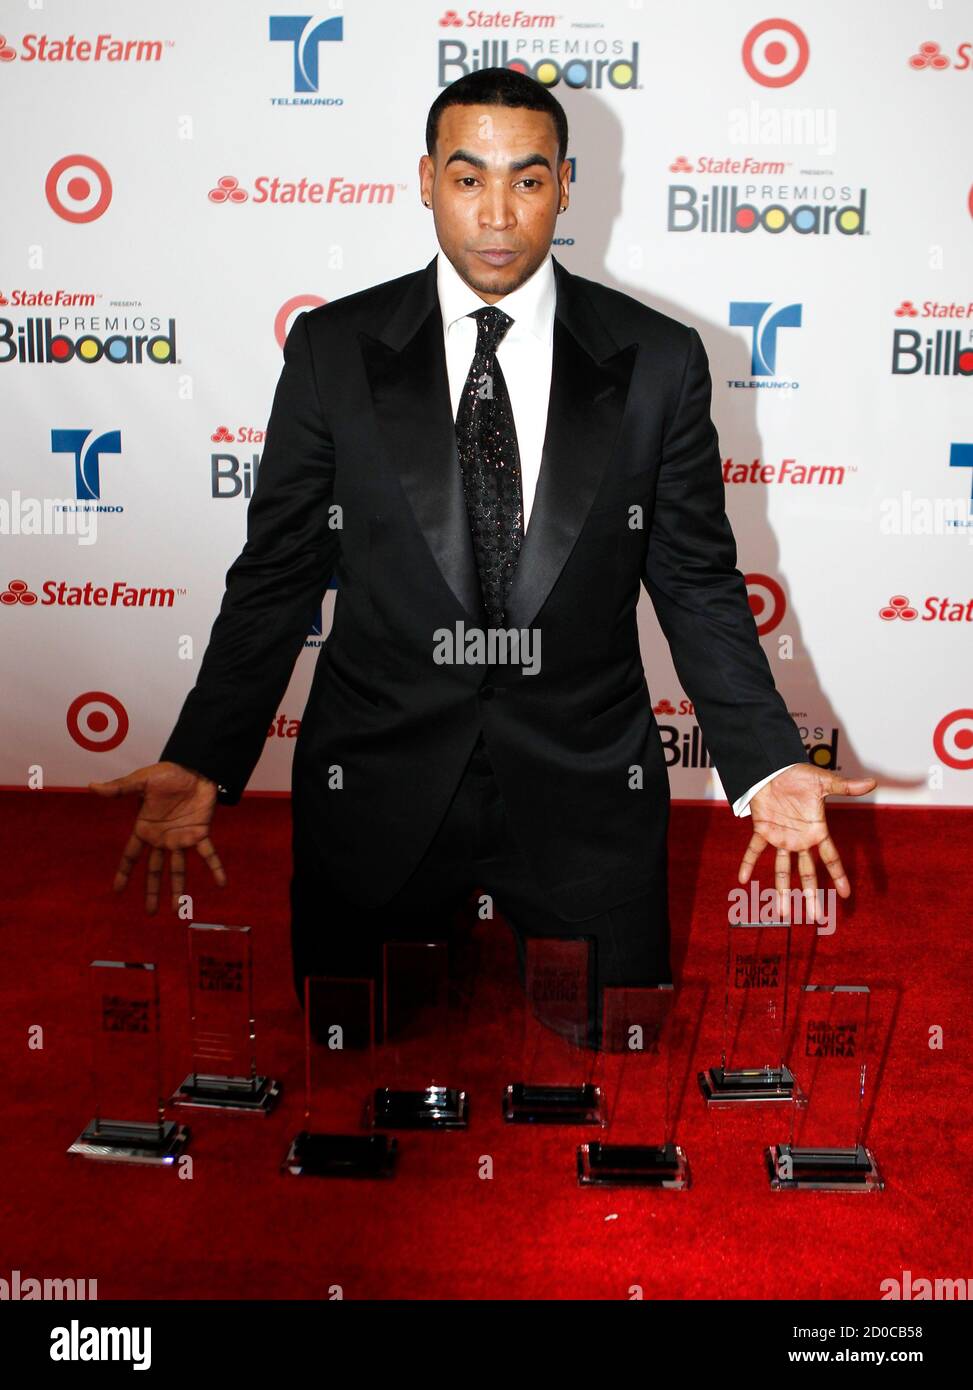 Puerto Rican Singer Don Omar Poses With His Awards Backstage During The 12 Billboard Latin Music Awards In Coral Gables Florida April 26 12 Reuters Joe Skipper United States s Entertainment Stock Photo Alamy